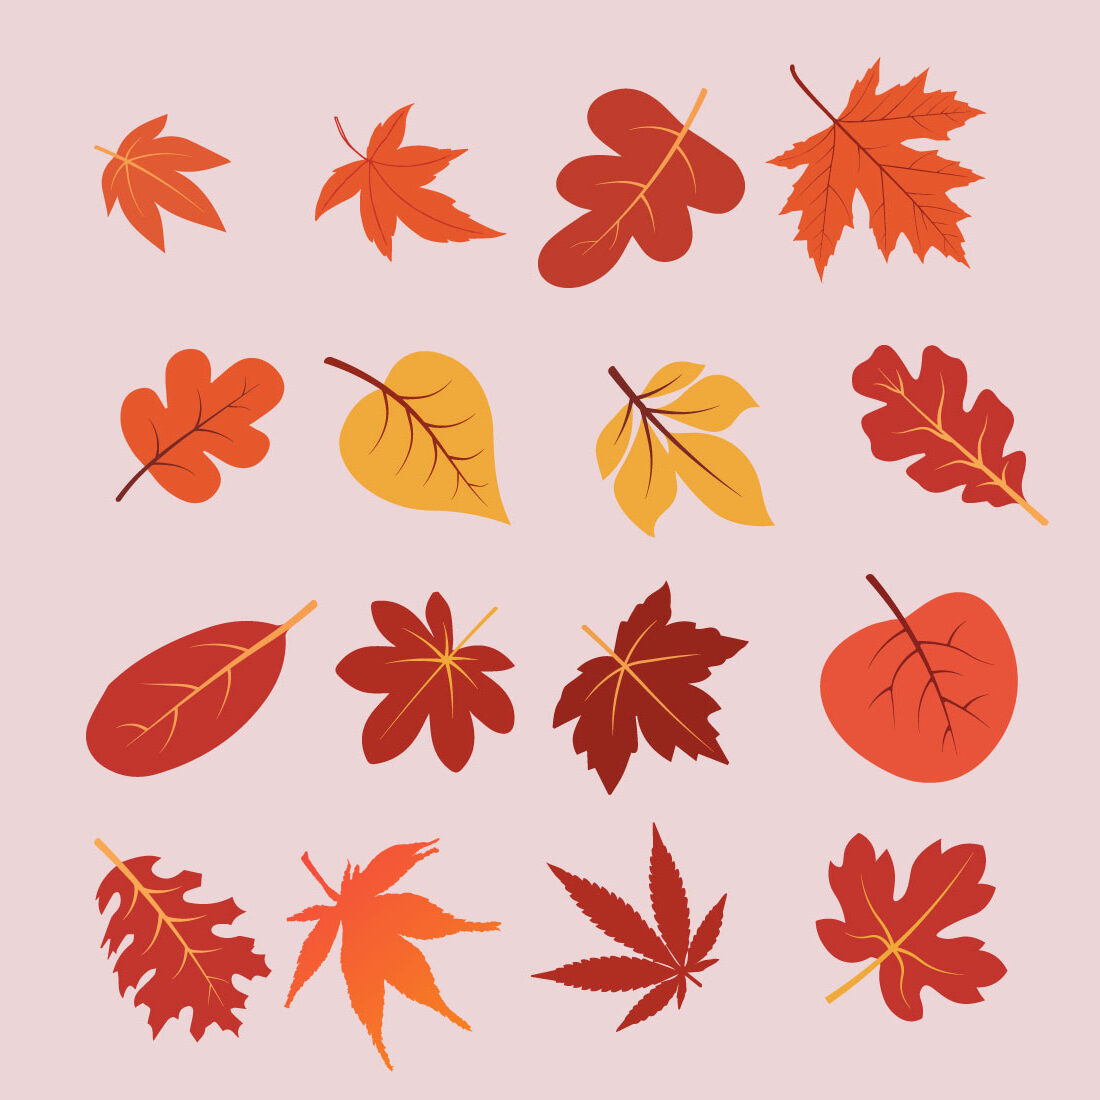 Fall Leaves Design Bundle Vector cover image.